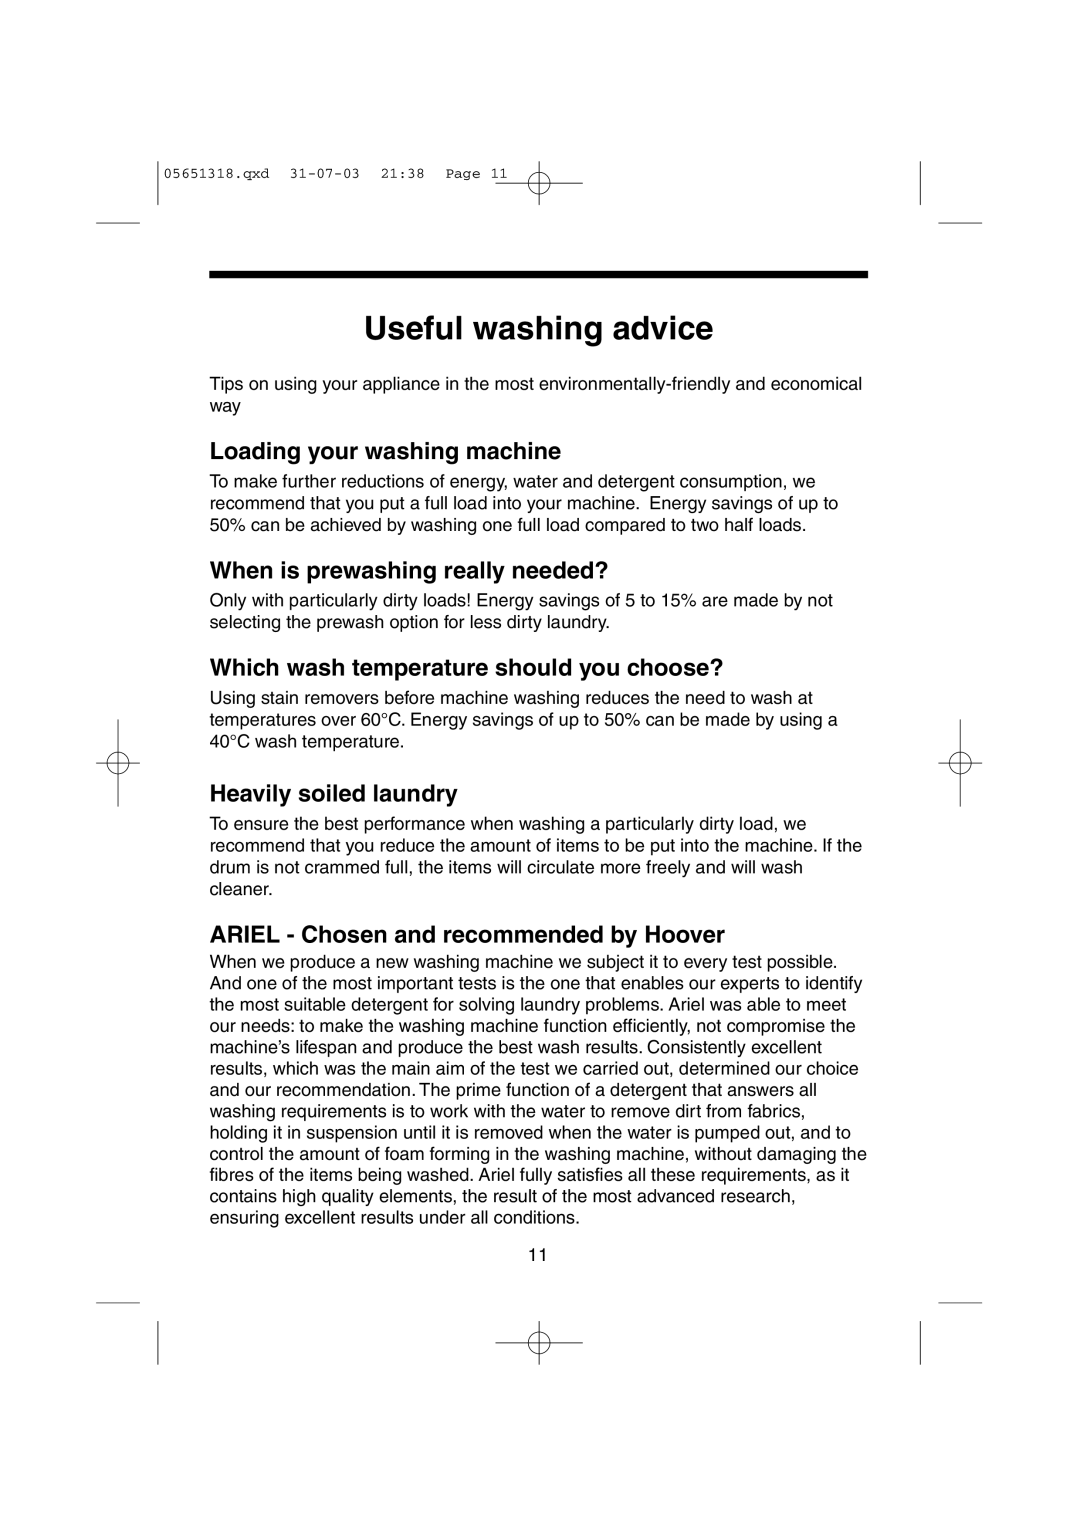 Hoover HPM120, HPM130, HPM110, HPM150 Useful washing advice, Loading your washing machine, When is prewashing really needed? 